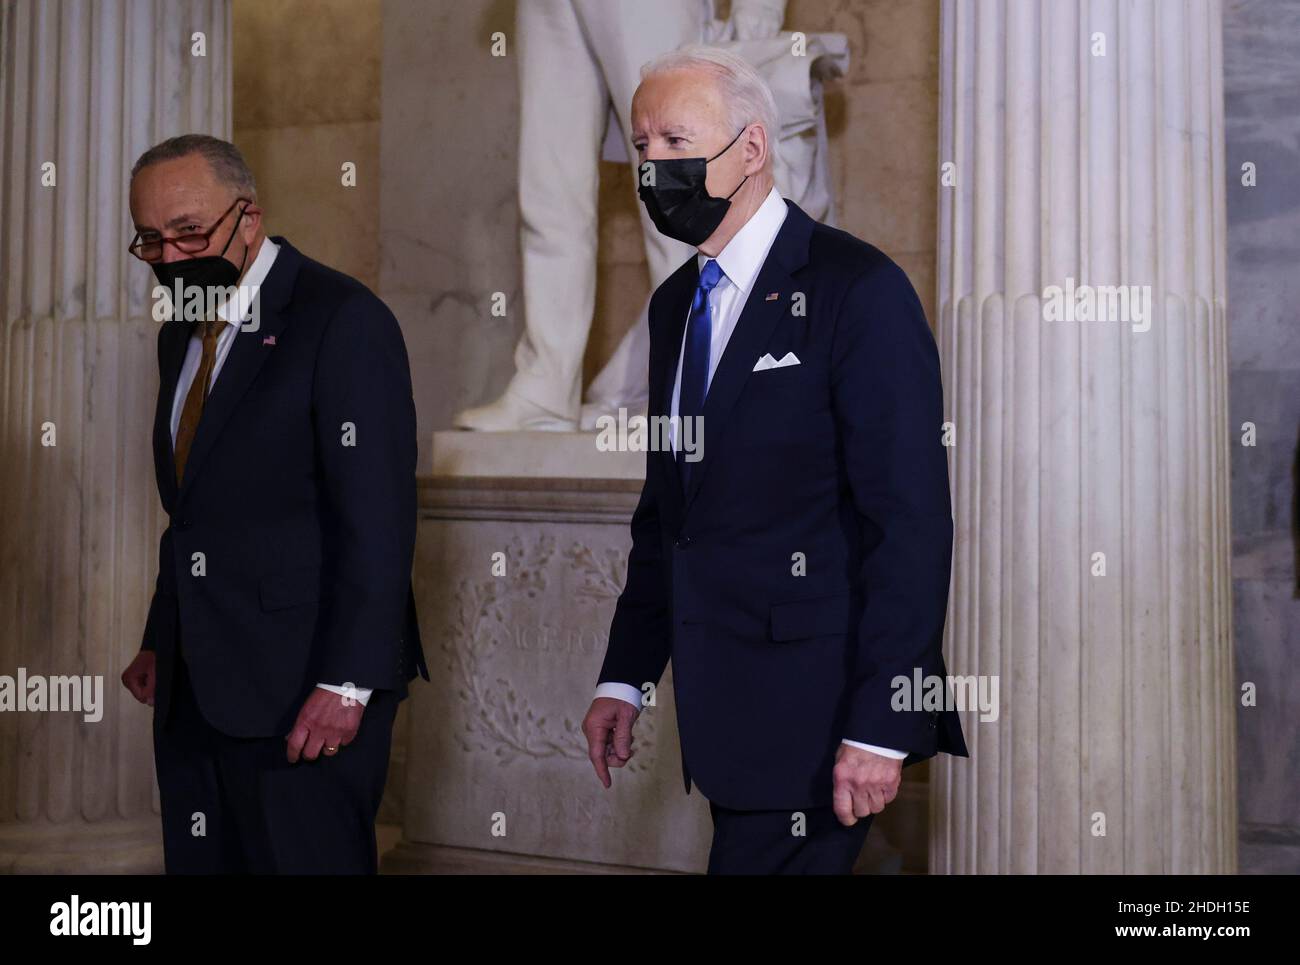 United States President Joe Biden is escorted by by US Senate Majority Leader Chuck Schumer (Democrat of New York) in the Hall of Columns as he arrives to mark the first anniversary of the January 6, 2021 attack on the U.S. Capitol by supporters of former President Donald Trump, on Capitol Hill in Washington, U.S., January 6, 2022.Credit: Evelyn Hockstein/Pool via CNP /MediaPunch Stock Photo